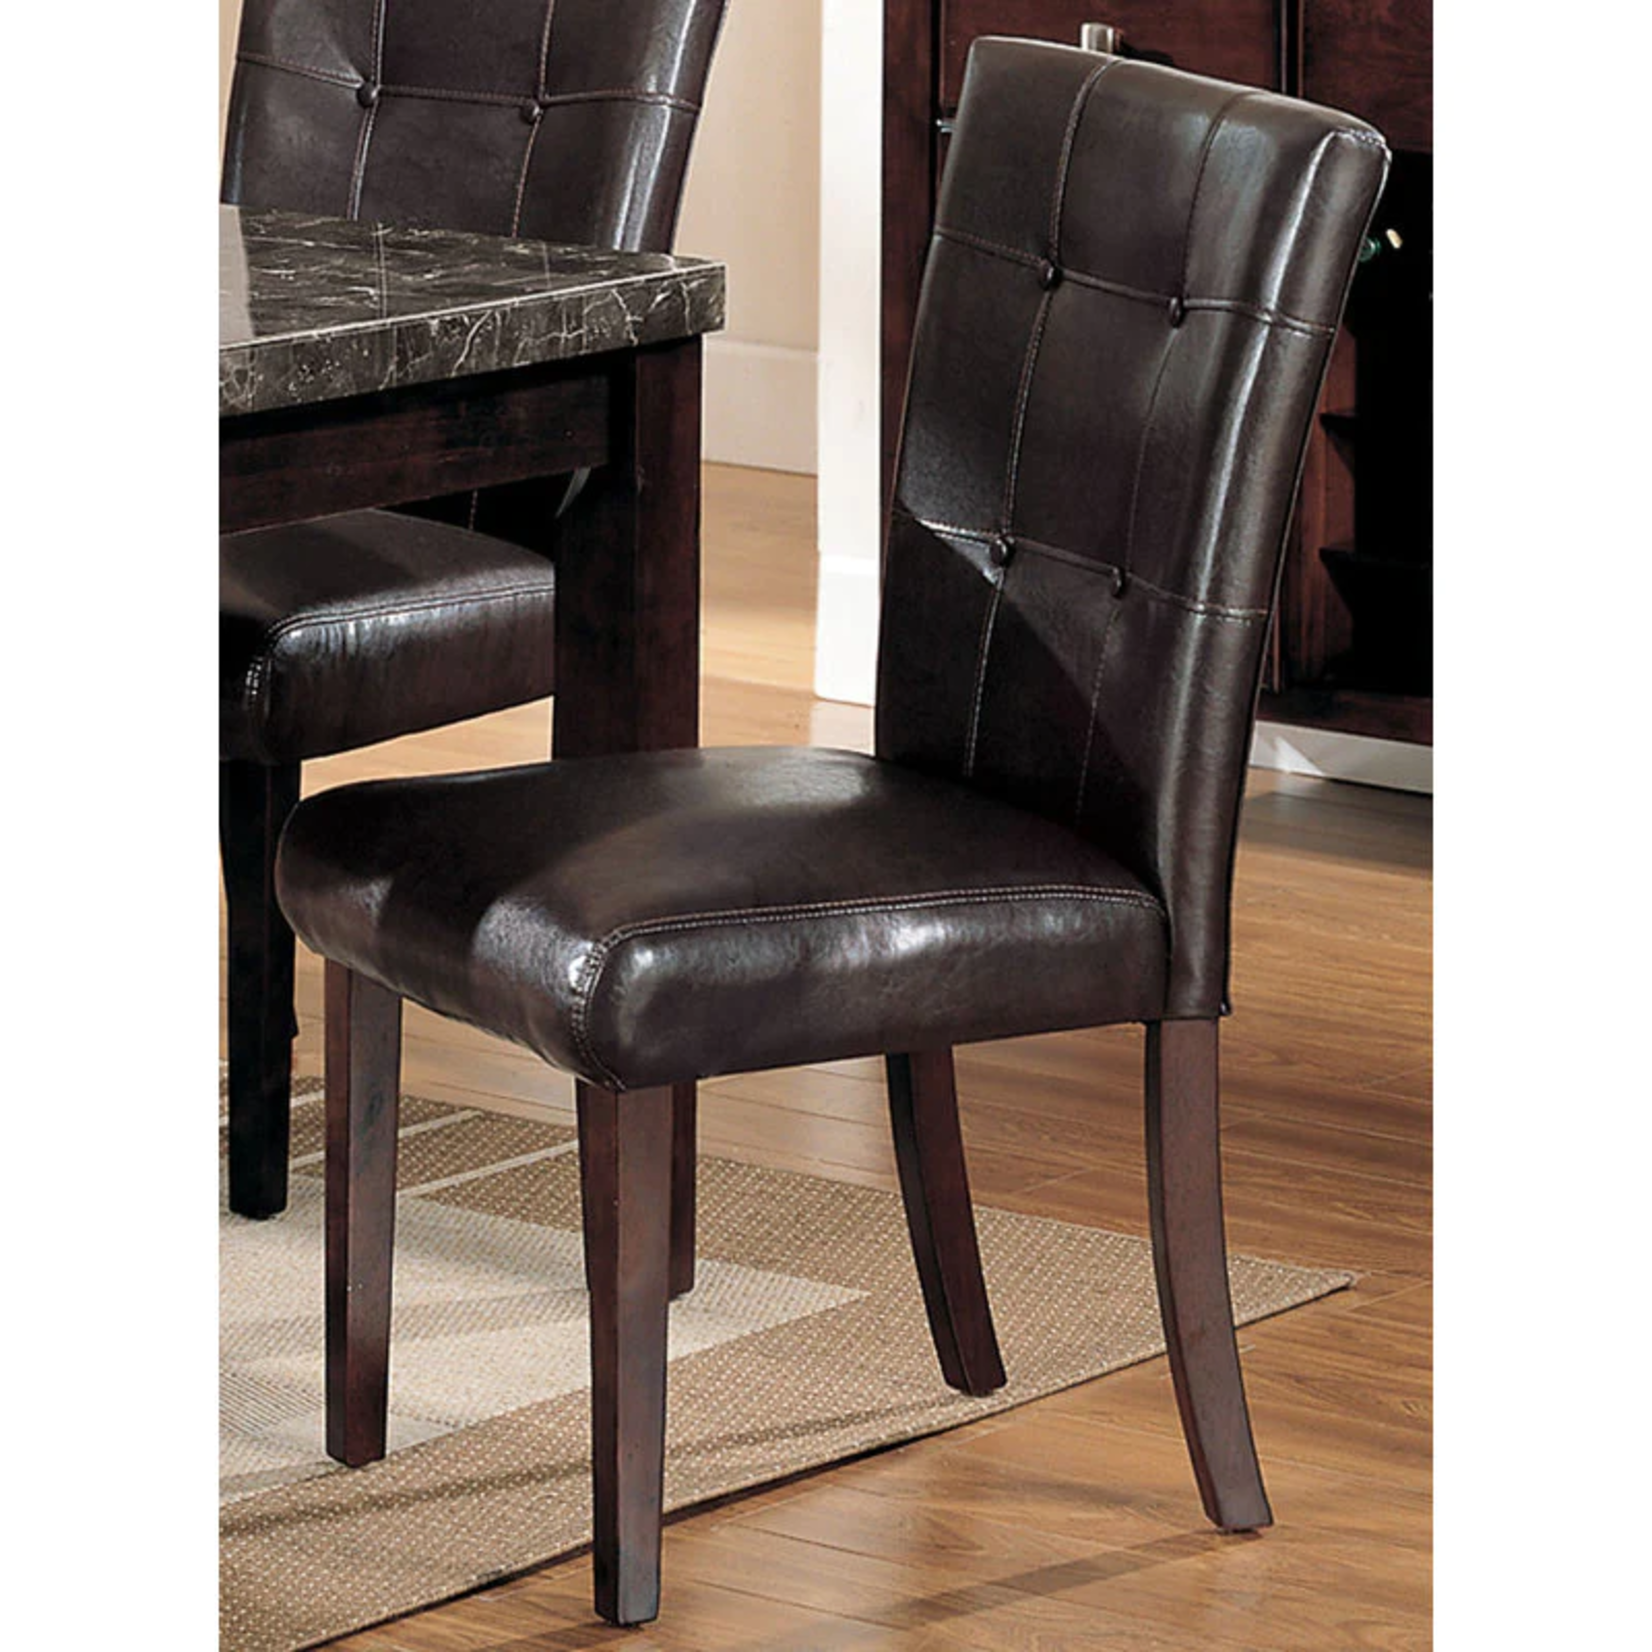 *Cozart Tufted Upholstered Side Chair in Espresso - Mark on leg - Set of 2